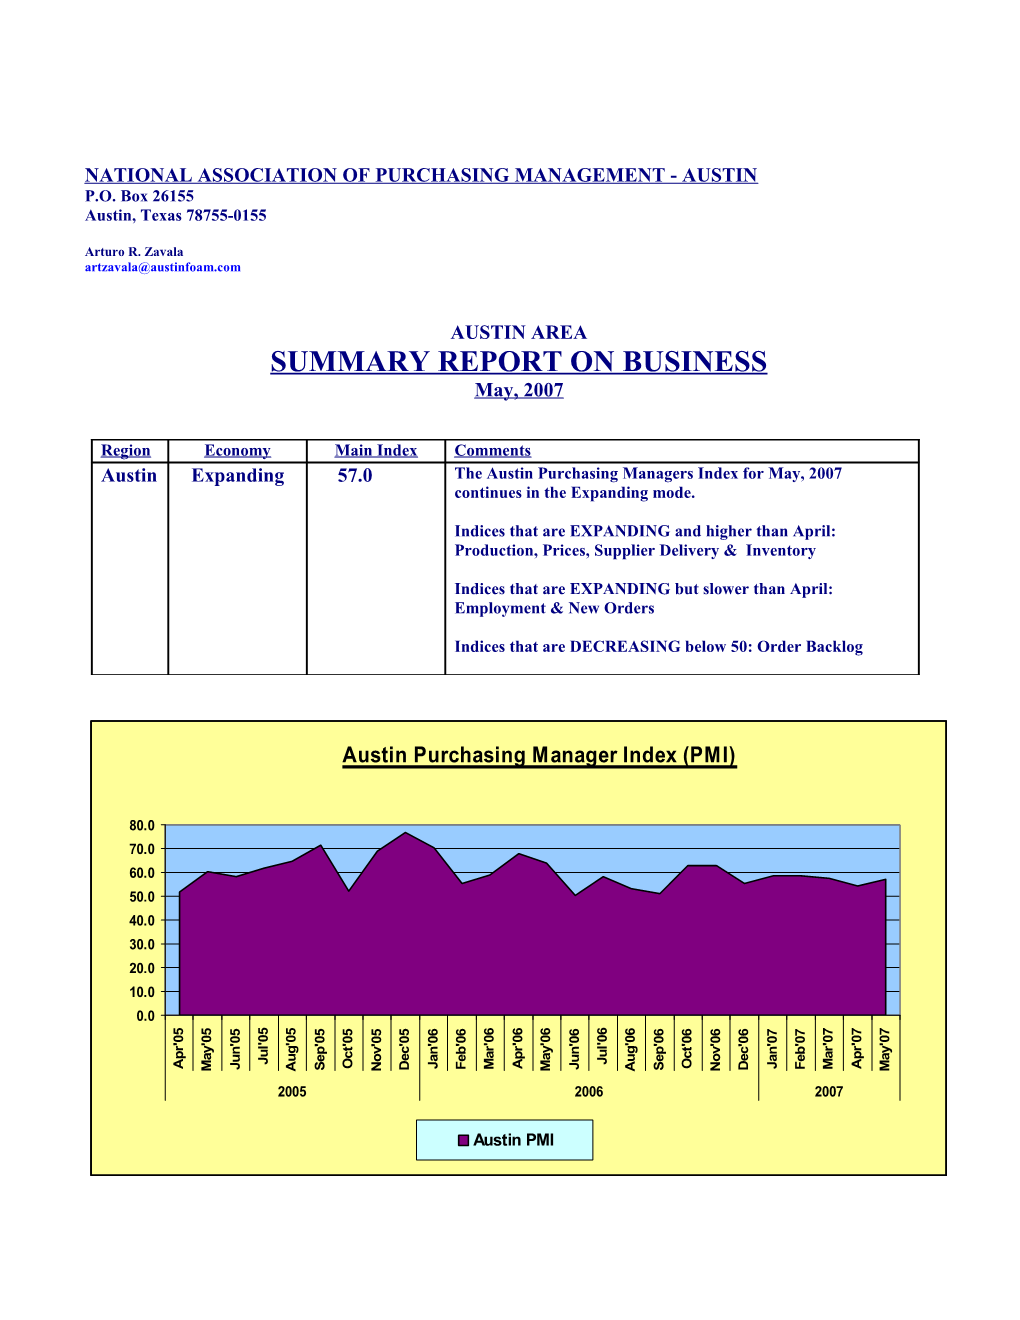 NAPM - Austin, Summary Report on Business May 2007